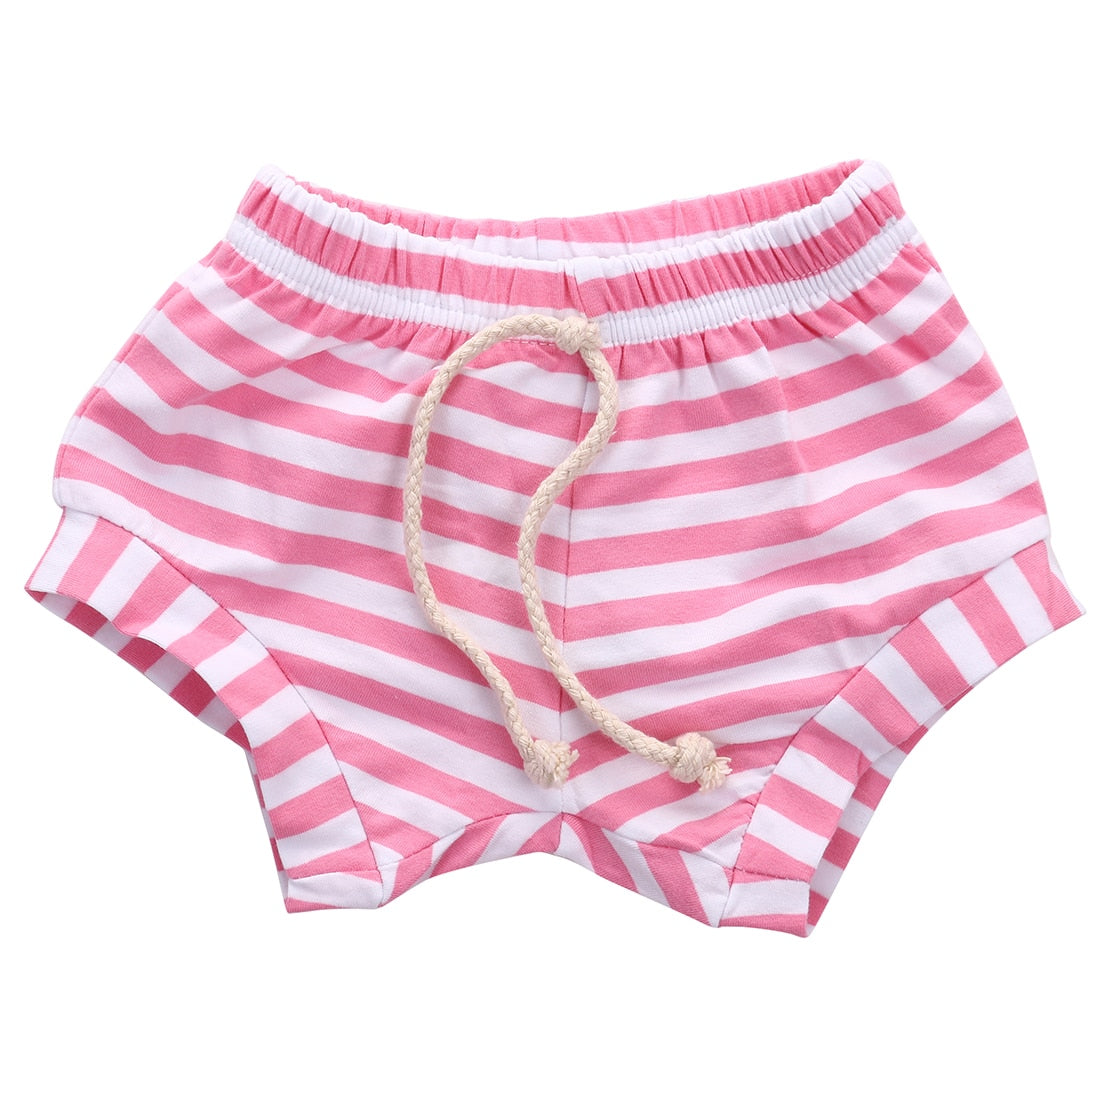 Cute Infant Baby Boys Girls Baggy Shorts Bottoms Stripes Toddler Summer Bloomers - ebowsos